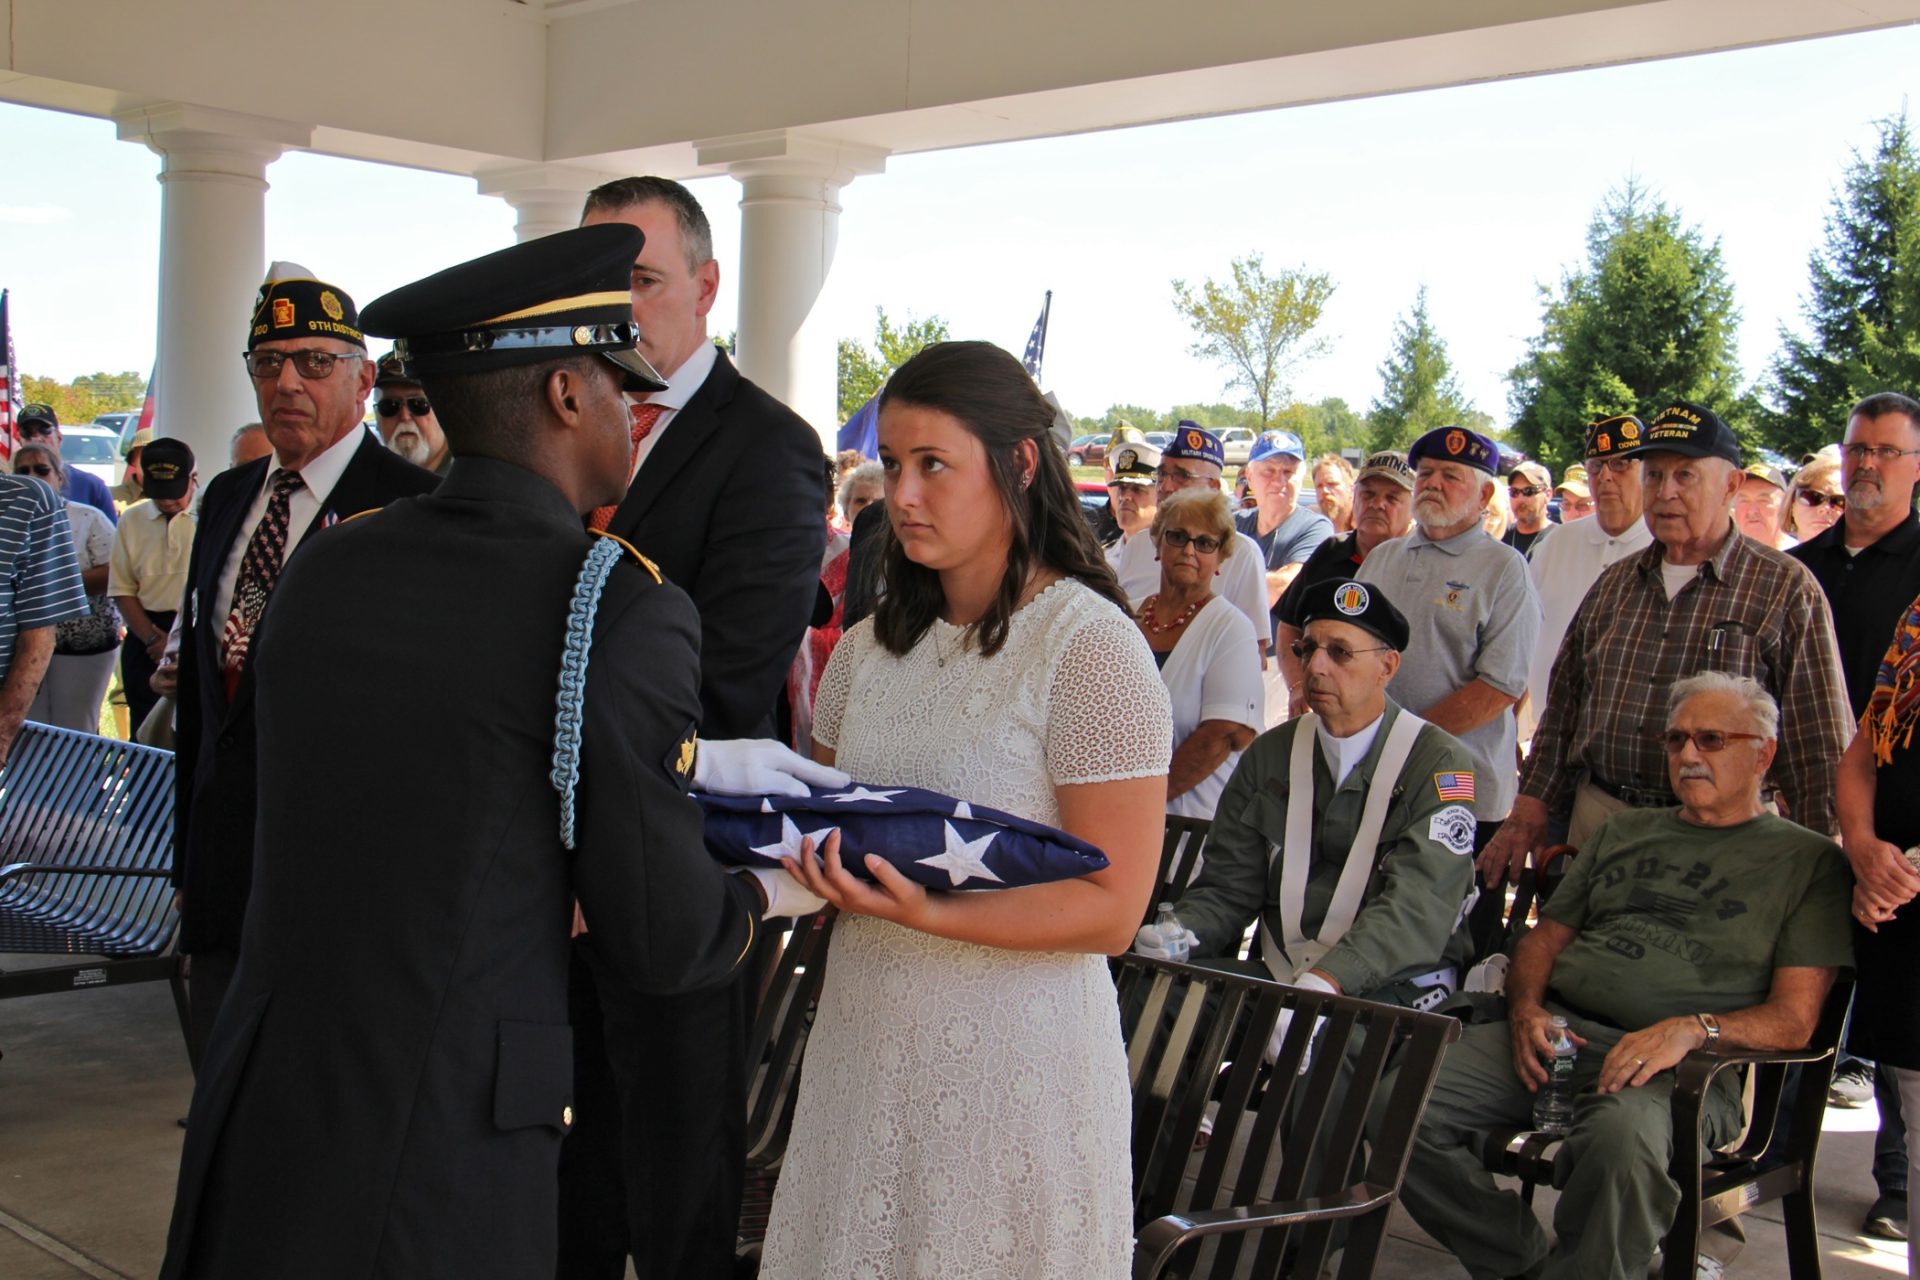 Justine Newman, an intern at the Bucks County Coroner's Office who helped to identify veterans among the office's unclaimed remains, is presented with a memorial flag during the service for 14 veterans who died unattended.